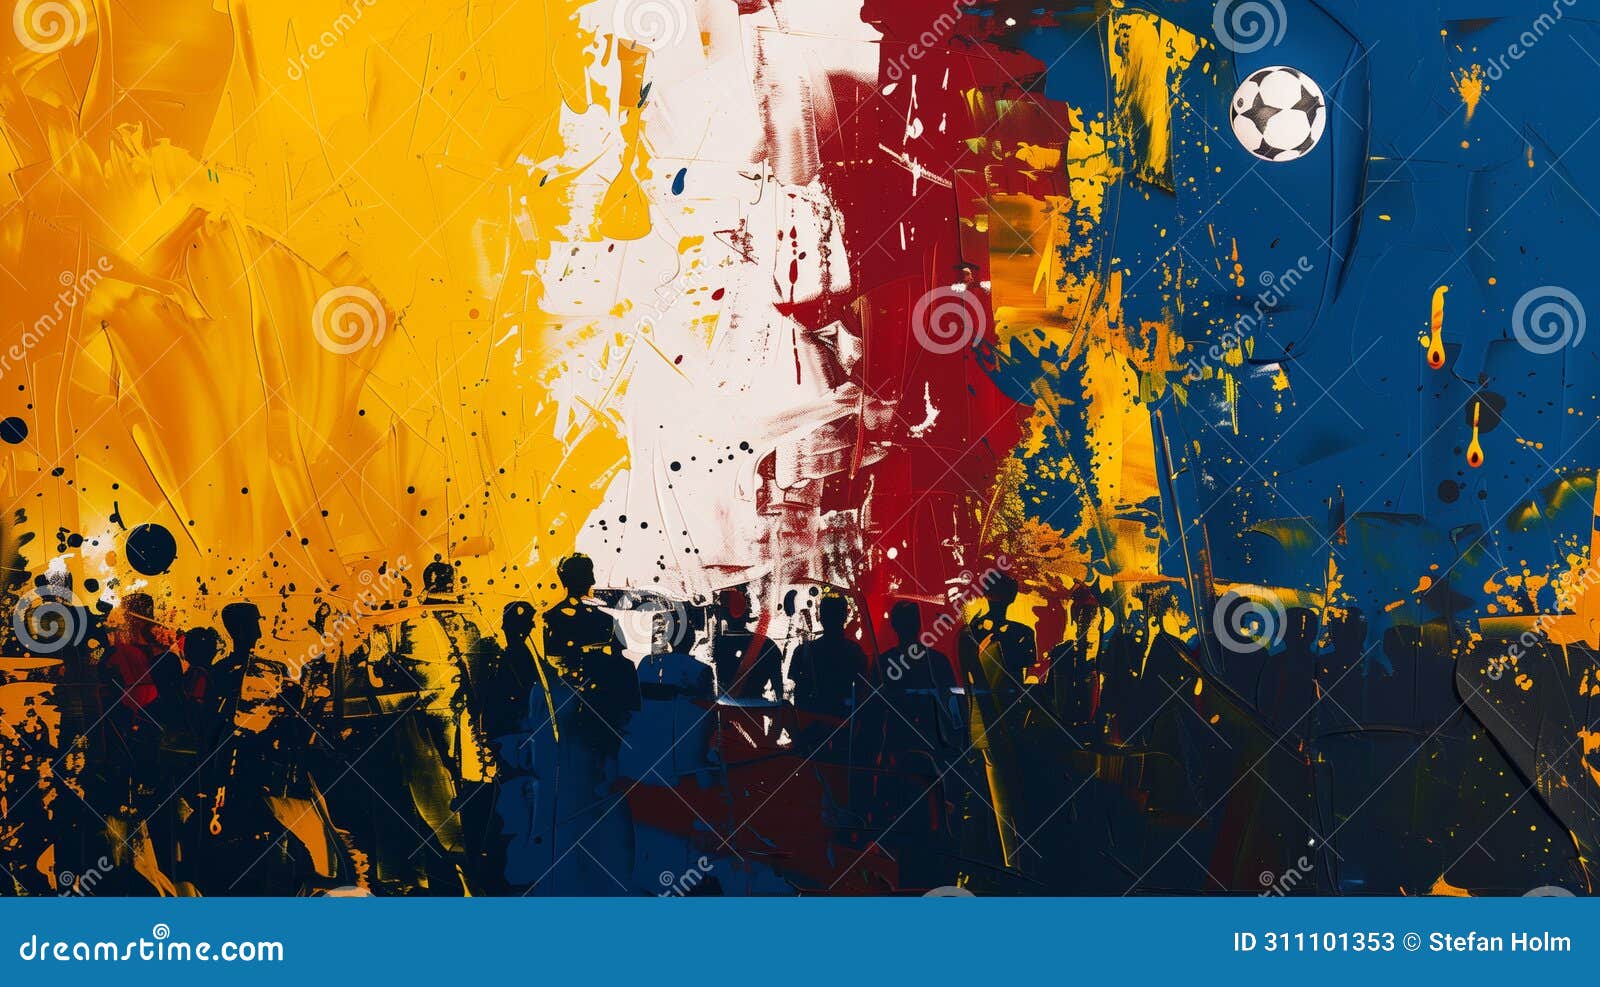 abstract painting of the football game el clasico, bursting with the colors of both teams, white and gold, blue and maroon.